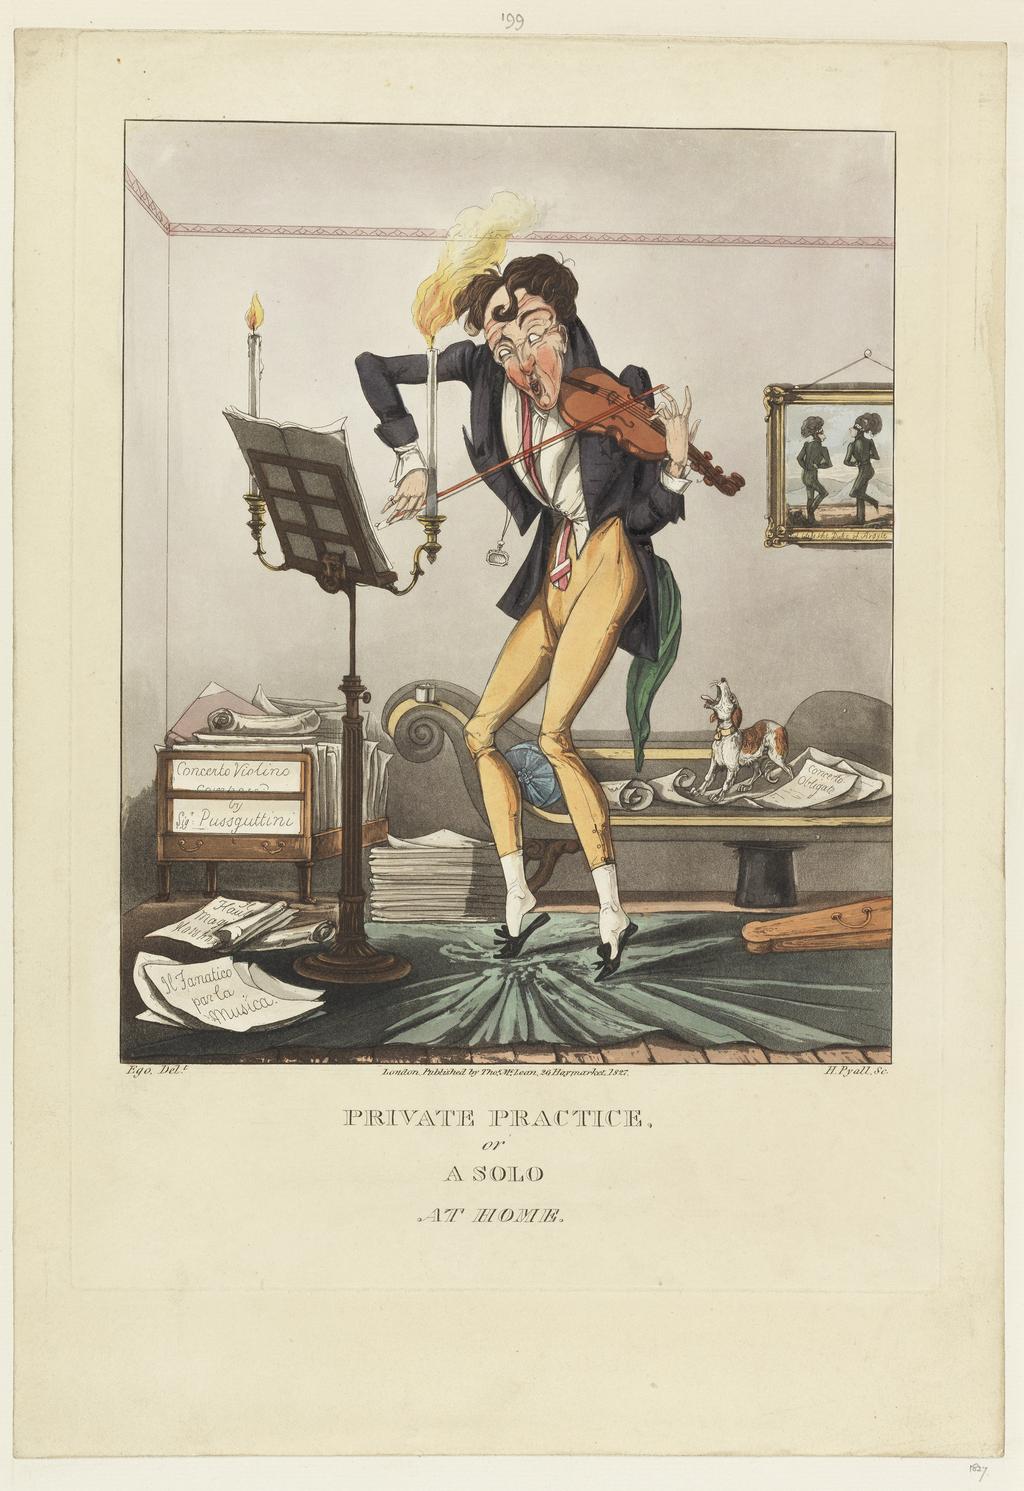 An image of Print album. Private Practice or a solo at home. Pyall, H,; printmaker (British, 1795-1833). McLean, Thomas, publisher (British, 1788-1859). Egerton, M., draughtsman, after (British, fl.1821-1827). Etching, aquatint, with hand colouring, 1827.